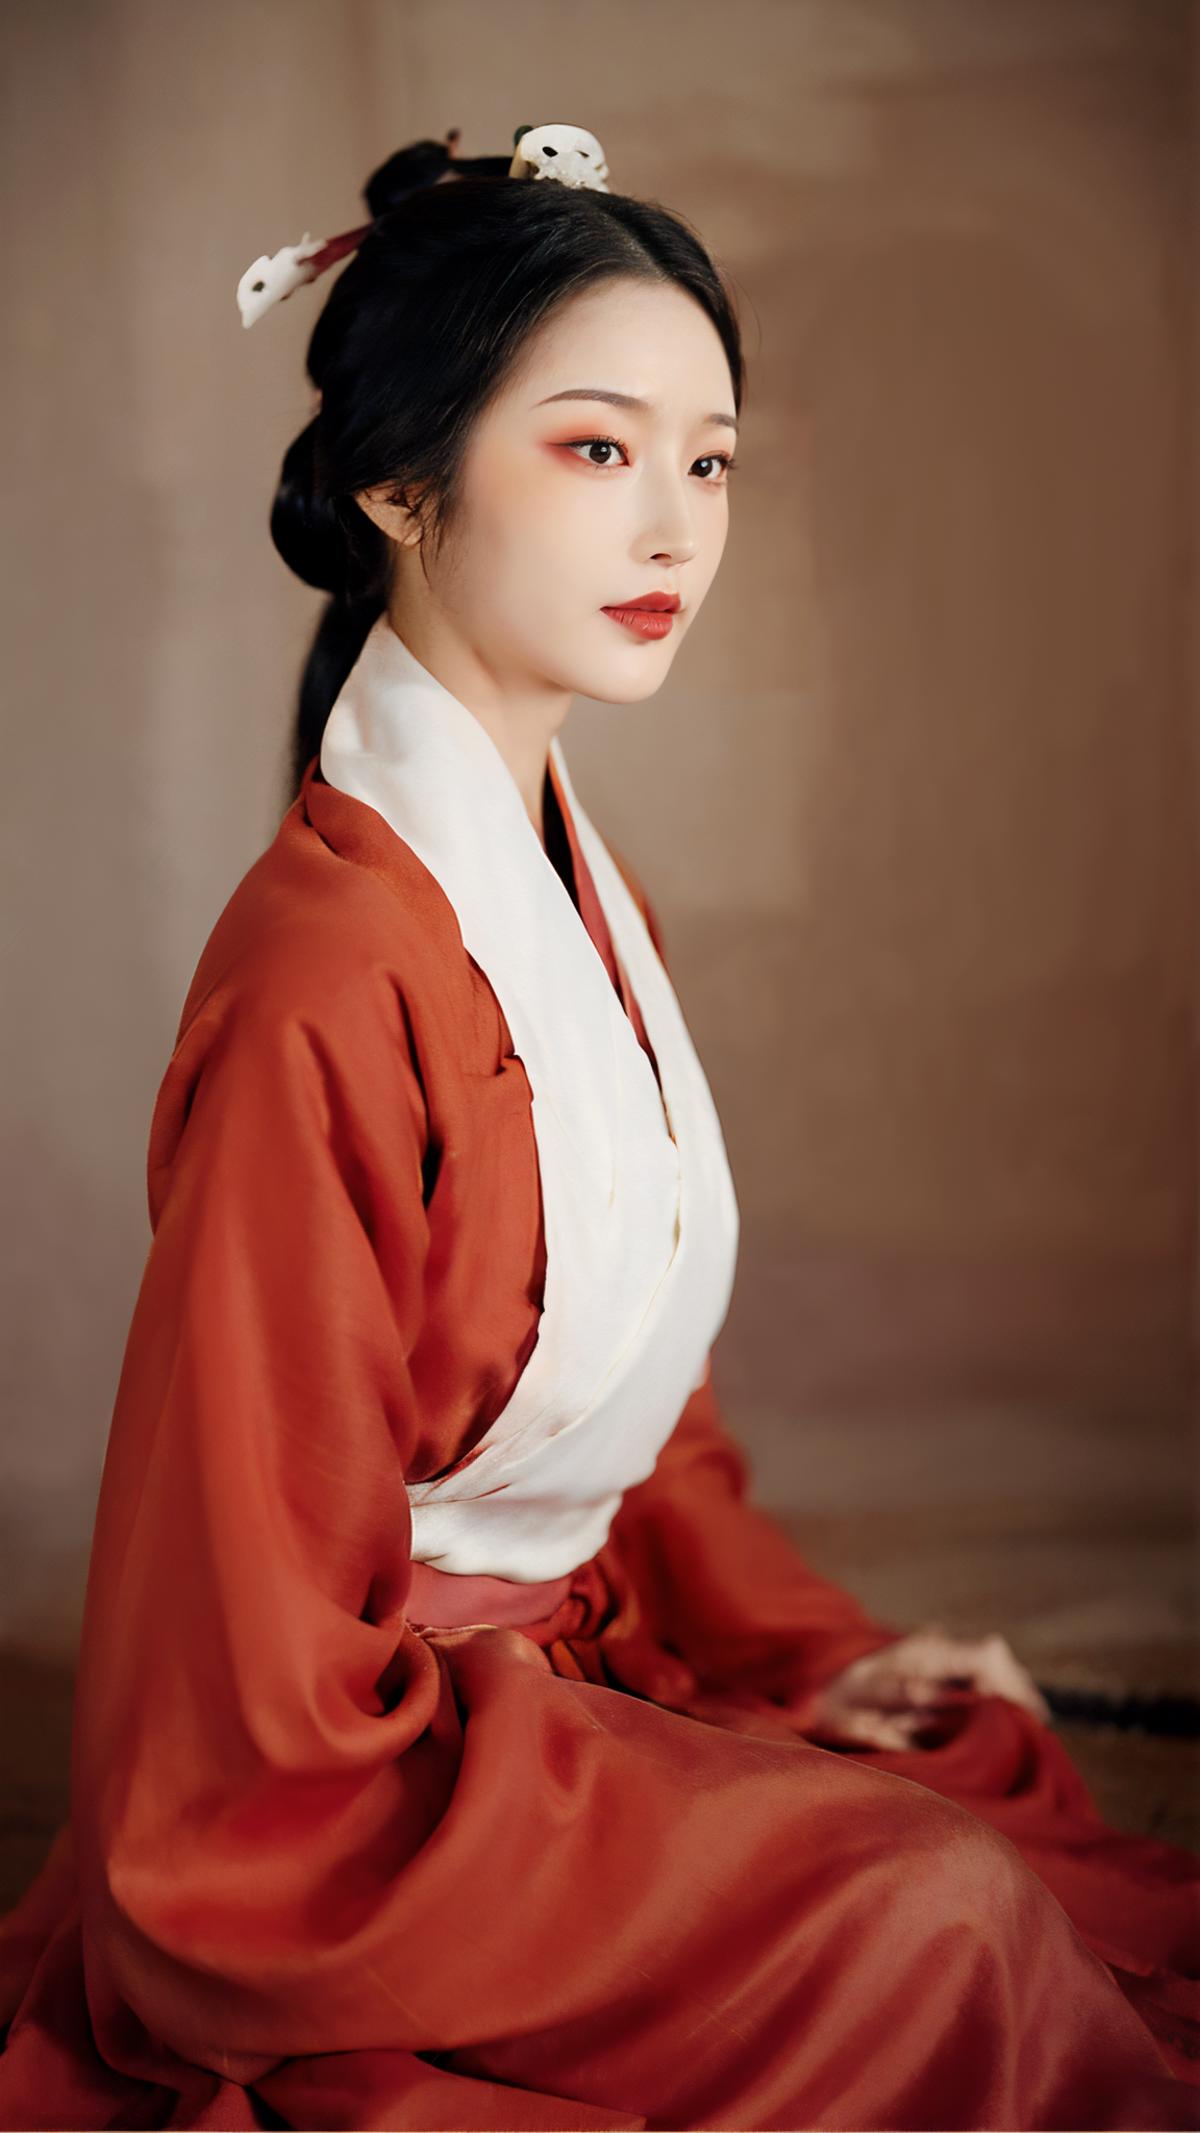 Clothing and makeup in the Qin and Han Dynasties-Classic red and white Hanfu || 秦汉时期的服饰与妆容- 经典红白汉服 image by Gostar